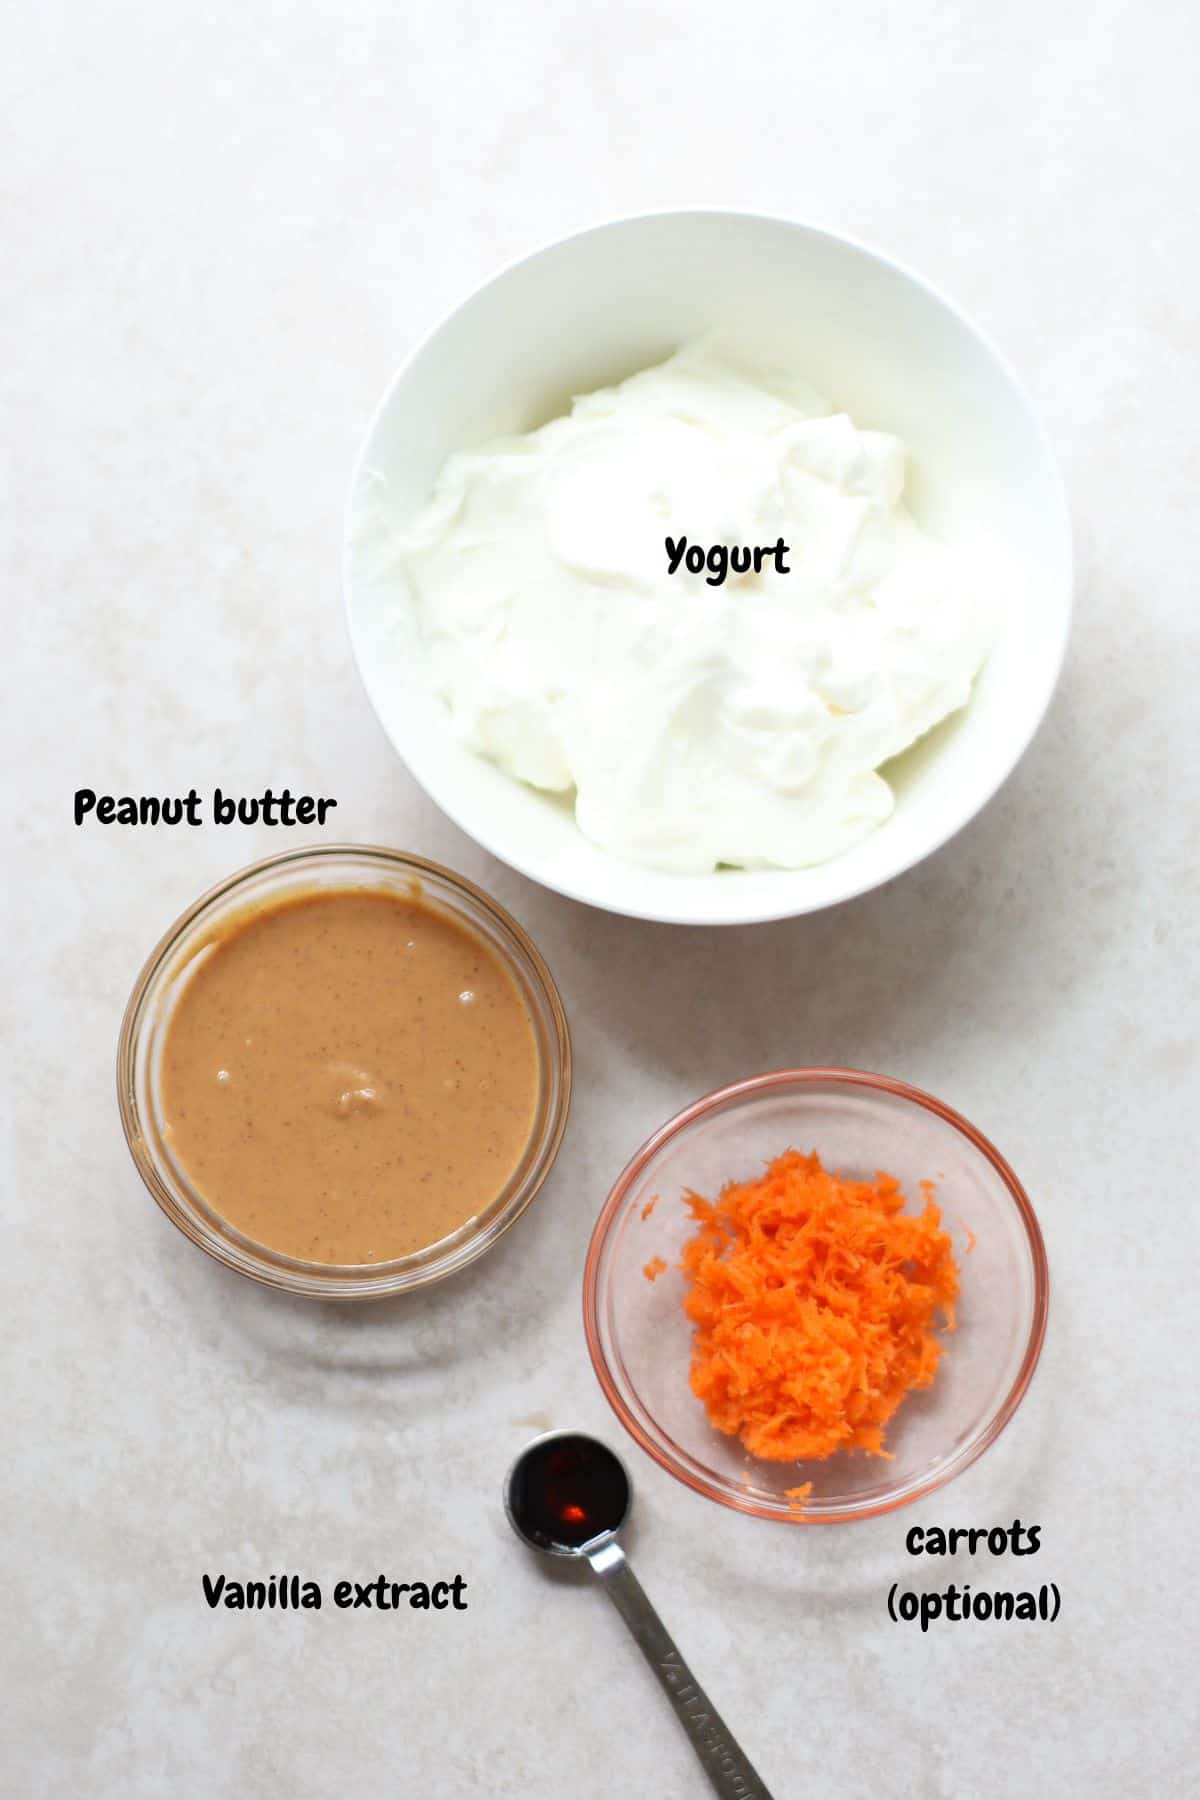 Yogurt, peanut butter, grated carrots, and vanilla extract on a white background.